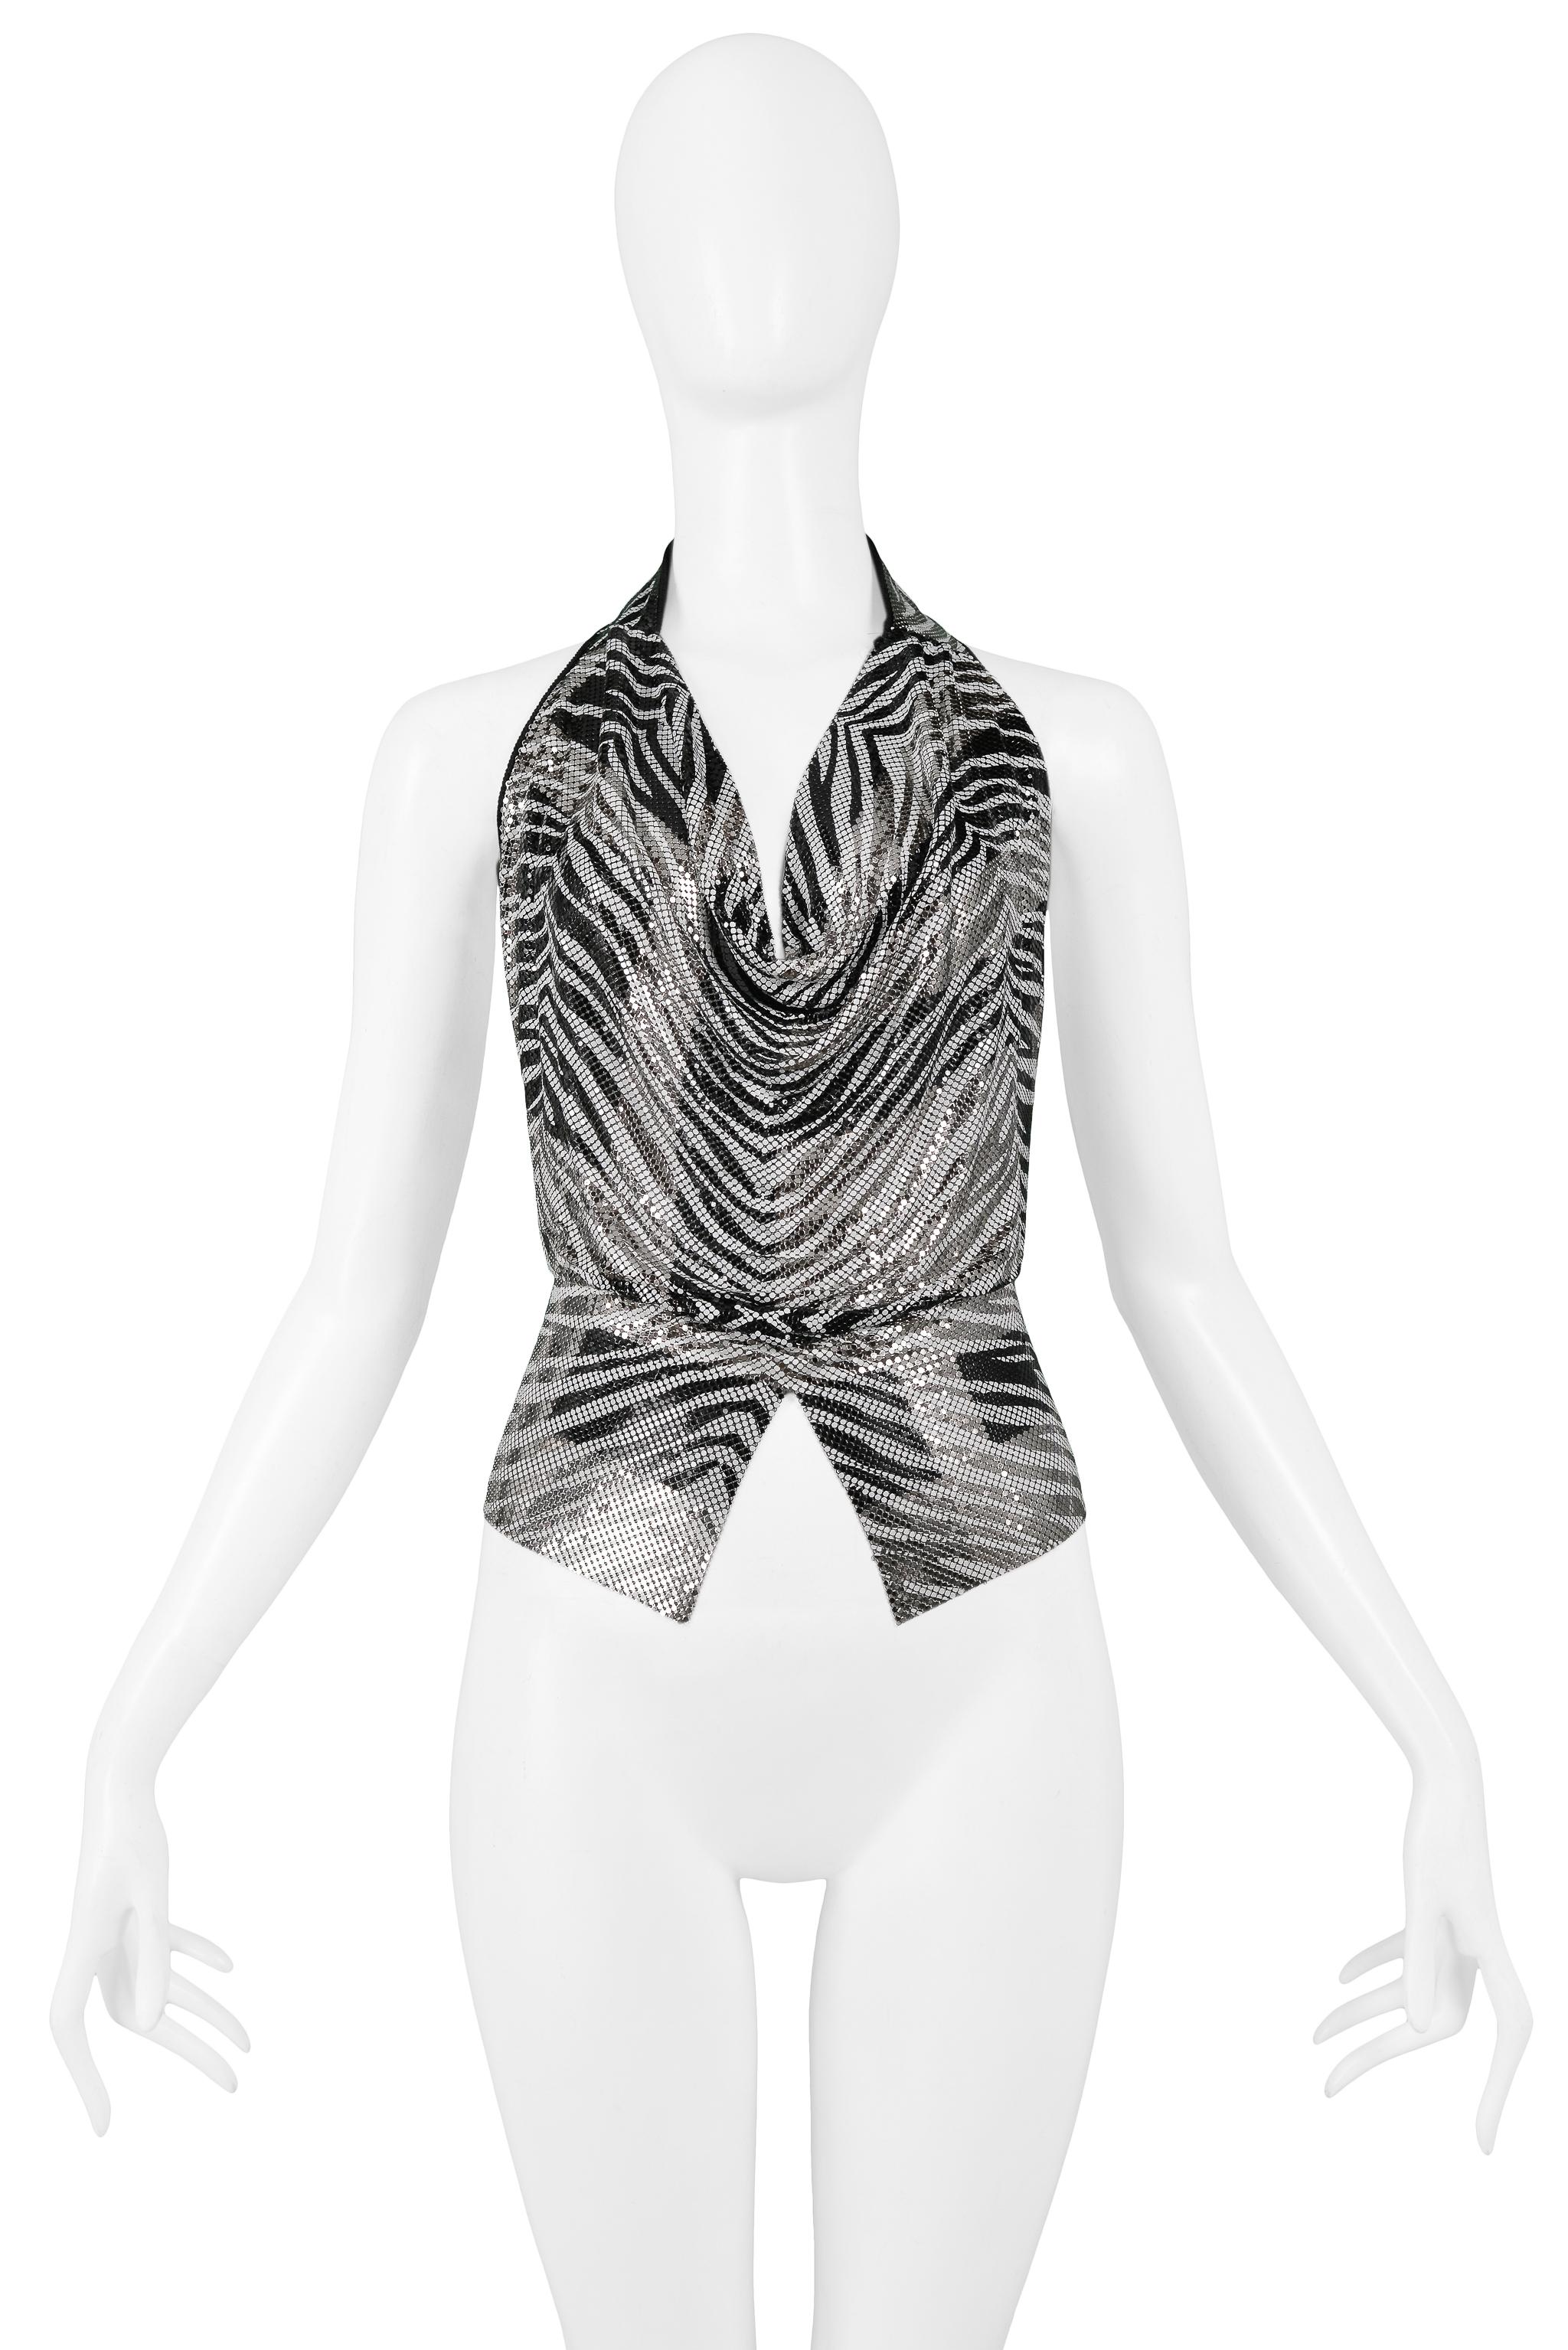 We are excited to offer a vintage Anthony Ferrara handmade black and white zebra print chainmail metal halter top with heavily beaded black and clear rhinestones and labradorite crystal back, leather straps, and diamond front cut out hem. The cowl